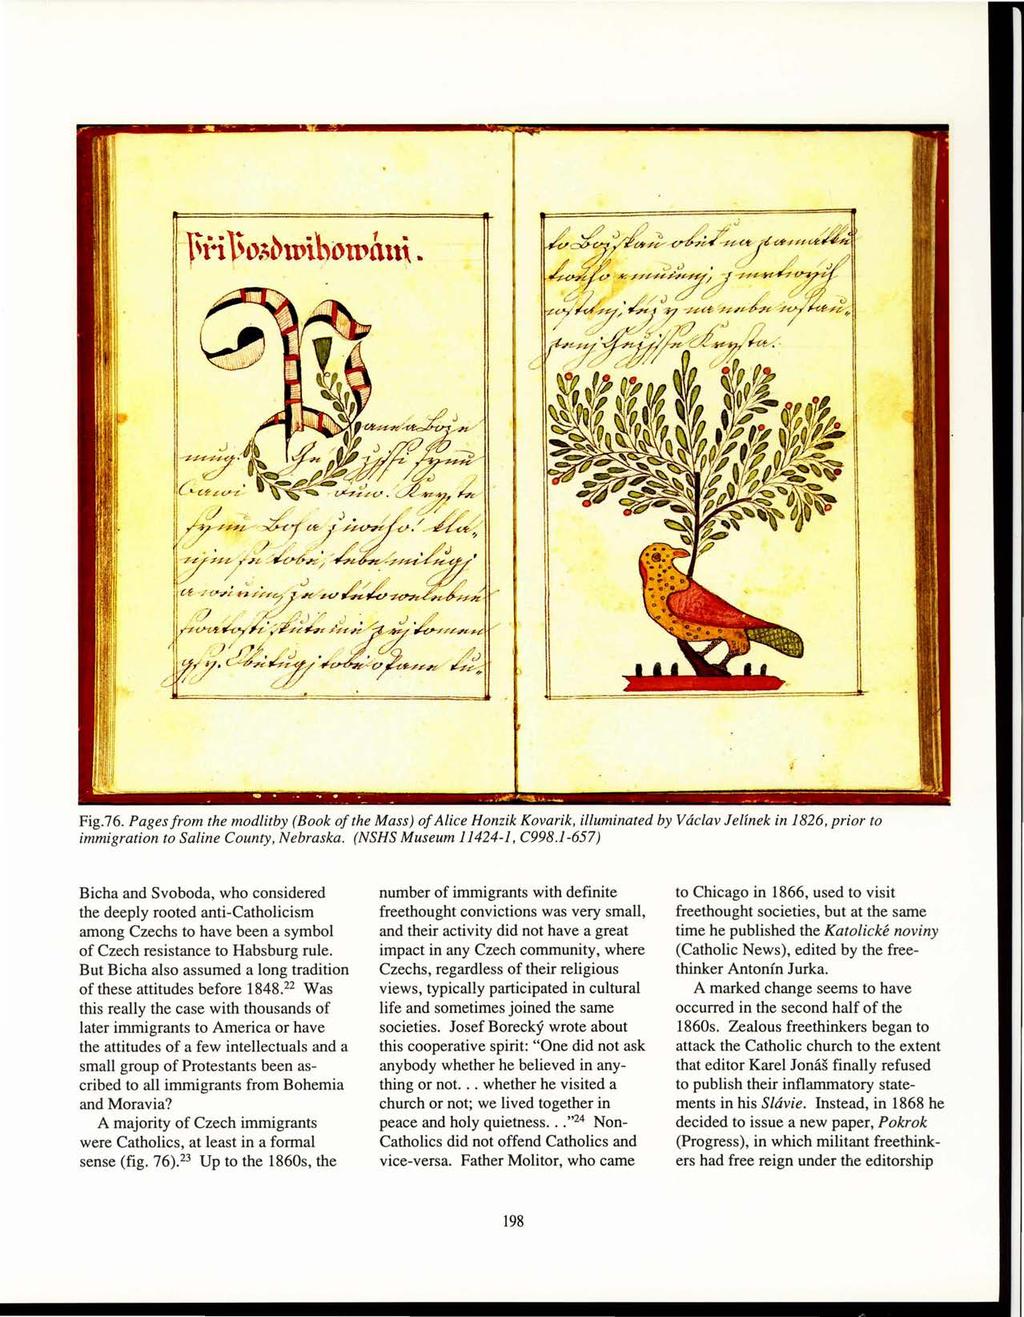 Fig.76. Pages from the modlitby (Book of the Mass) ofalice Honzik Kovarik, illuminated by Vaclav Jelinek in 1826, prior to immigration to Saline County, Nebraska. (NSHS Museum 11424-1, C998.